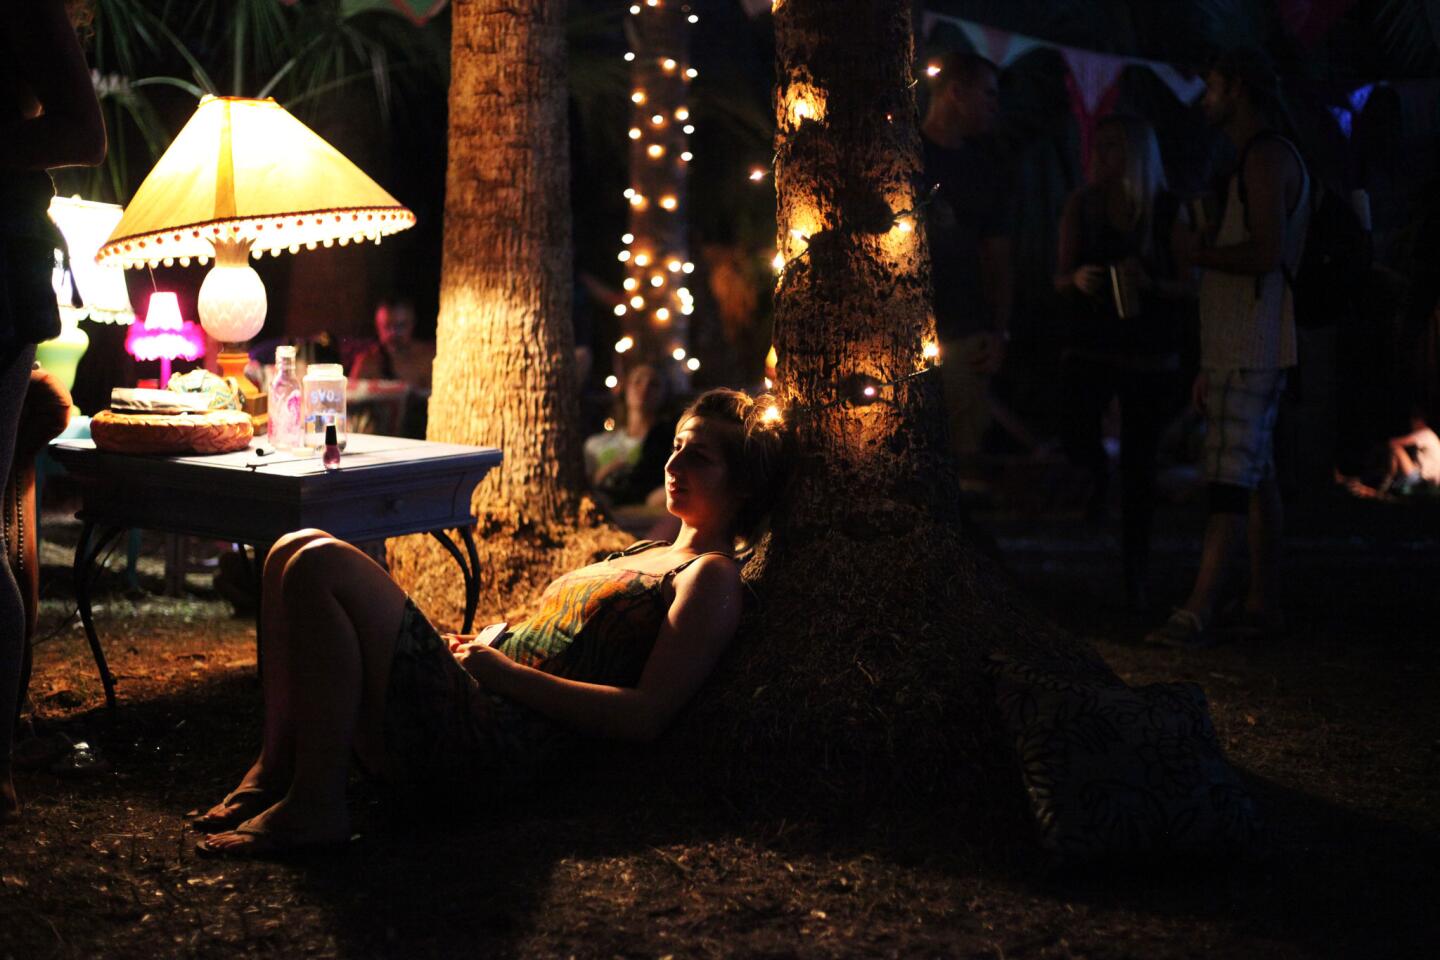 Sam Pope, 22, of Gainesville, sits by a tree inside the tea lounge at Okeechobee Music and Arts Festival on March 2.